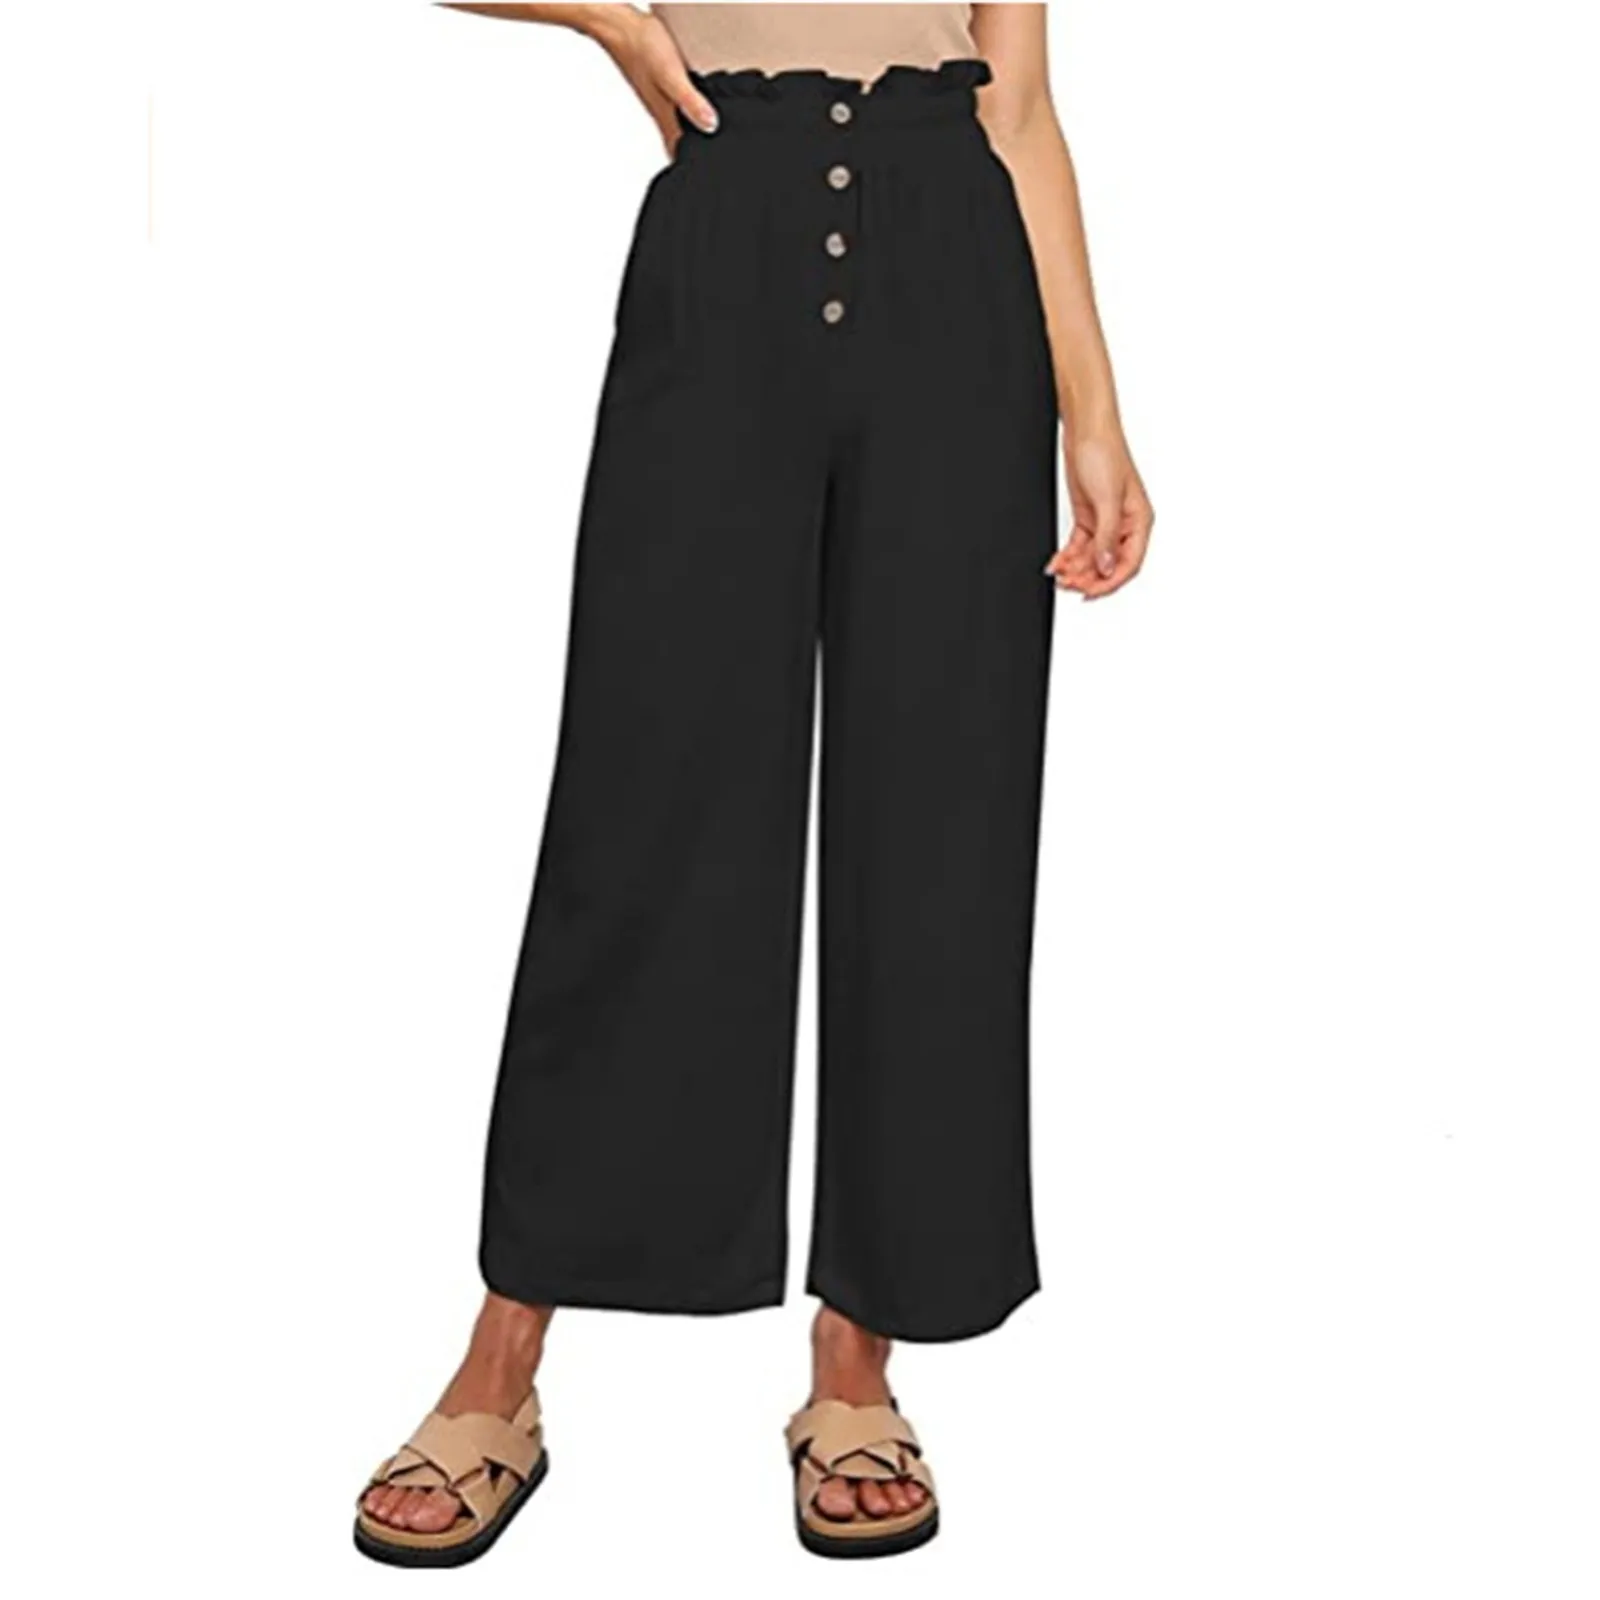 Women's High Waisted Loose Long Wide Leg Pants With Elastic Loose Casual Office Wide Leg Pants Oversized Jogger Trousers